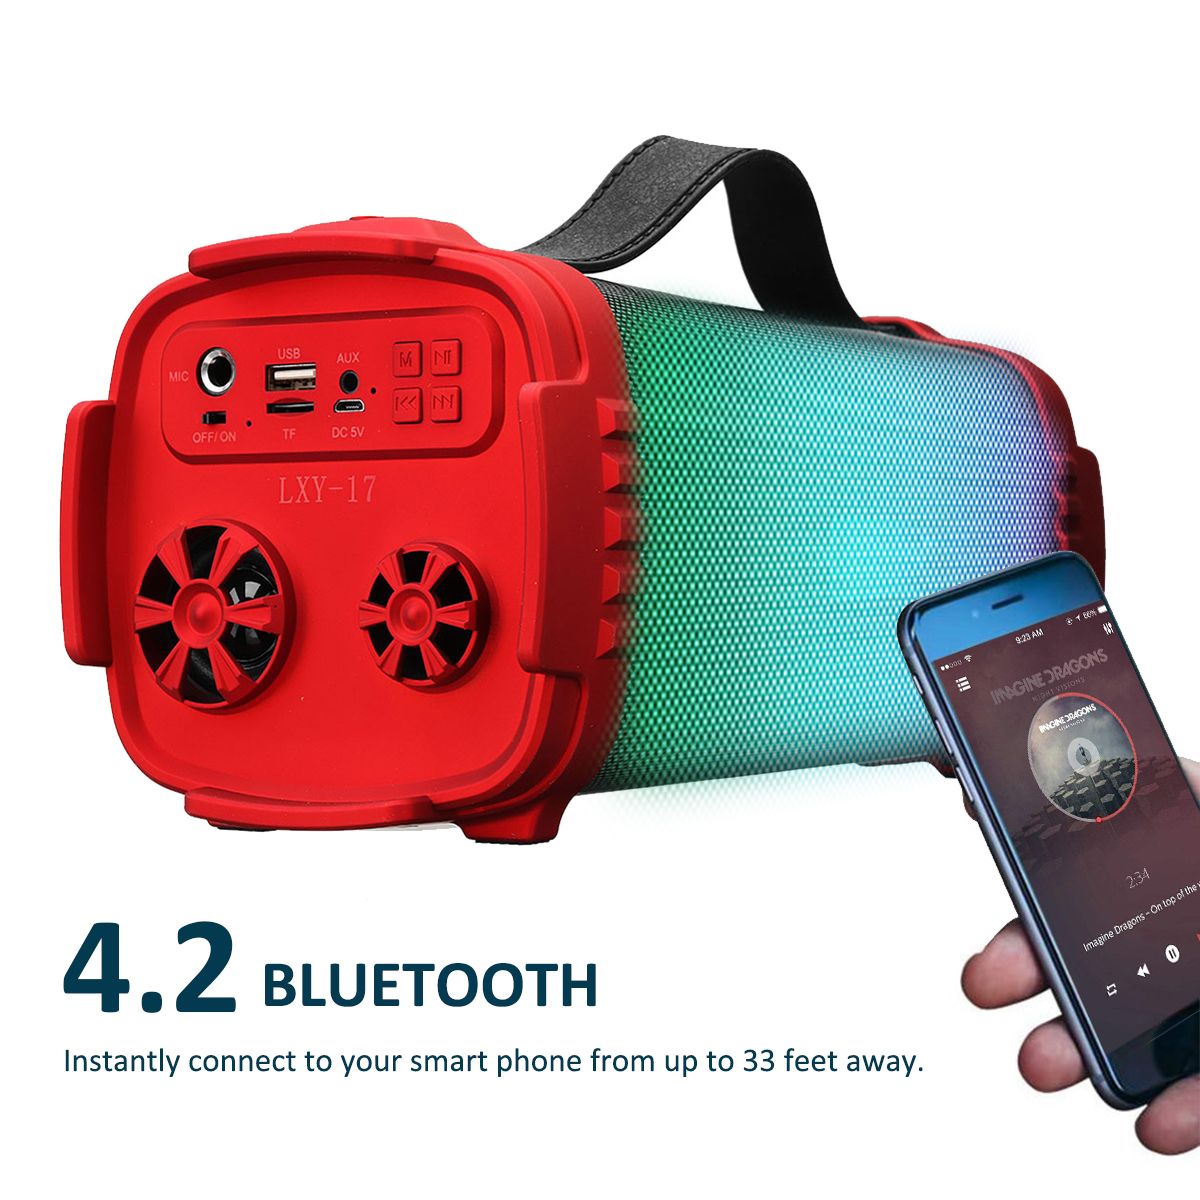 Portable-Wireless-bluetooth-Speaker-Colorful-LED-Light-Outdoor-Stereo-Bass-FM-Radio-TF-Card-Speaker-1388743